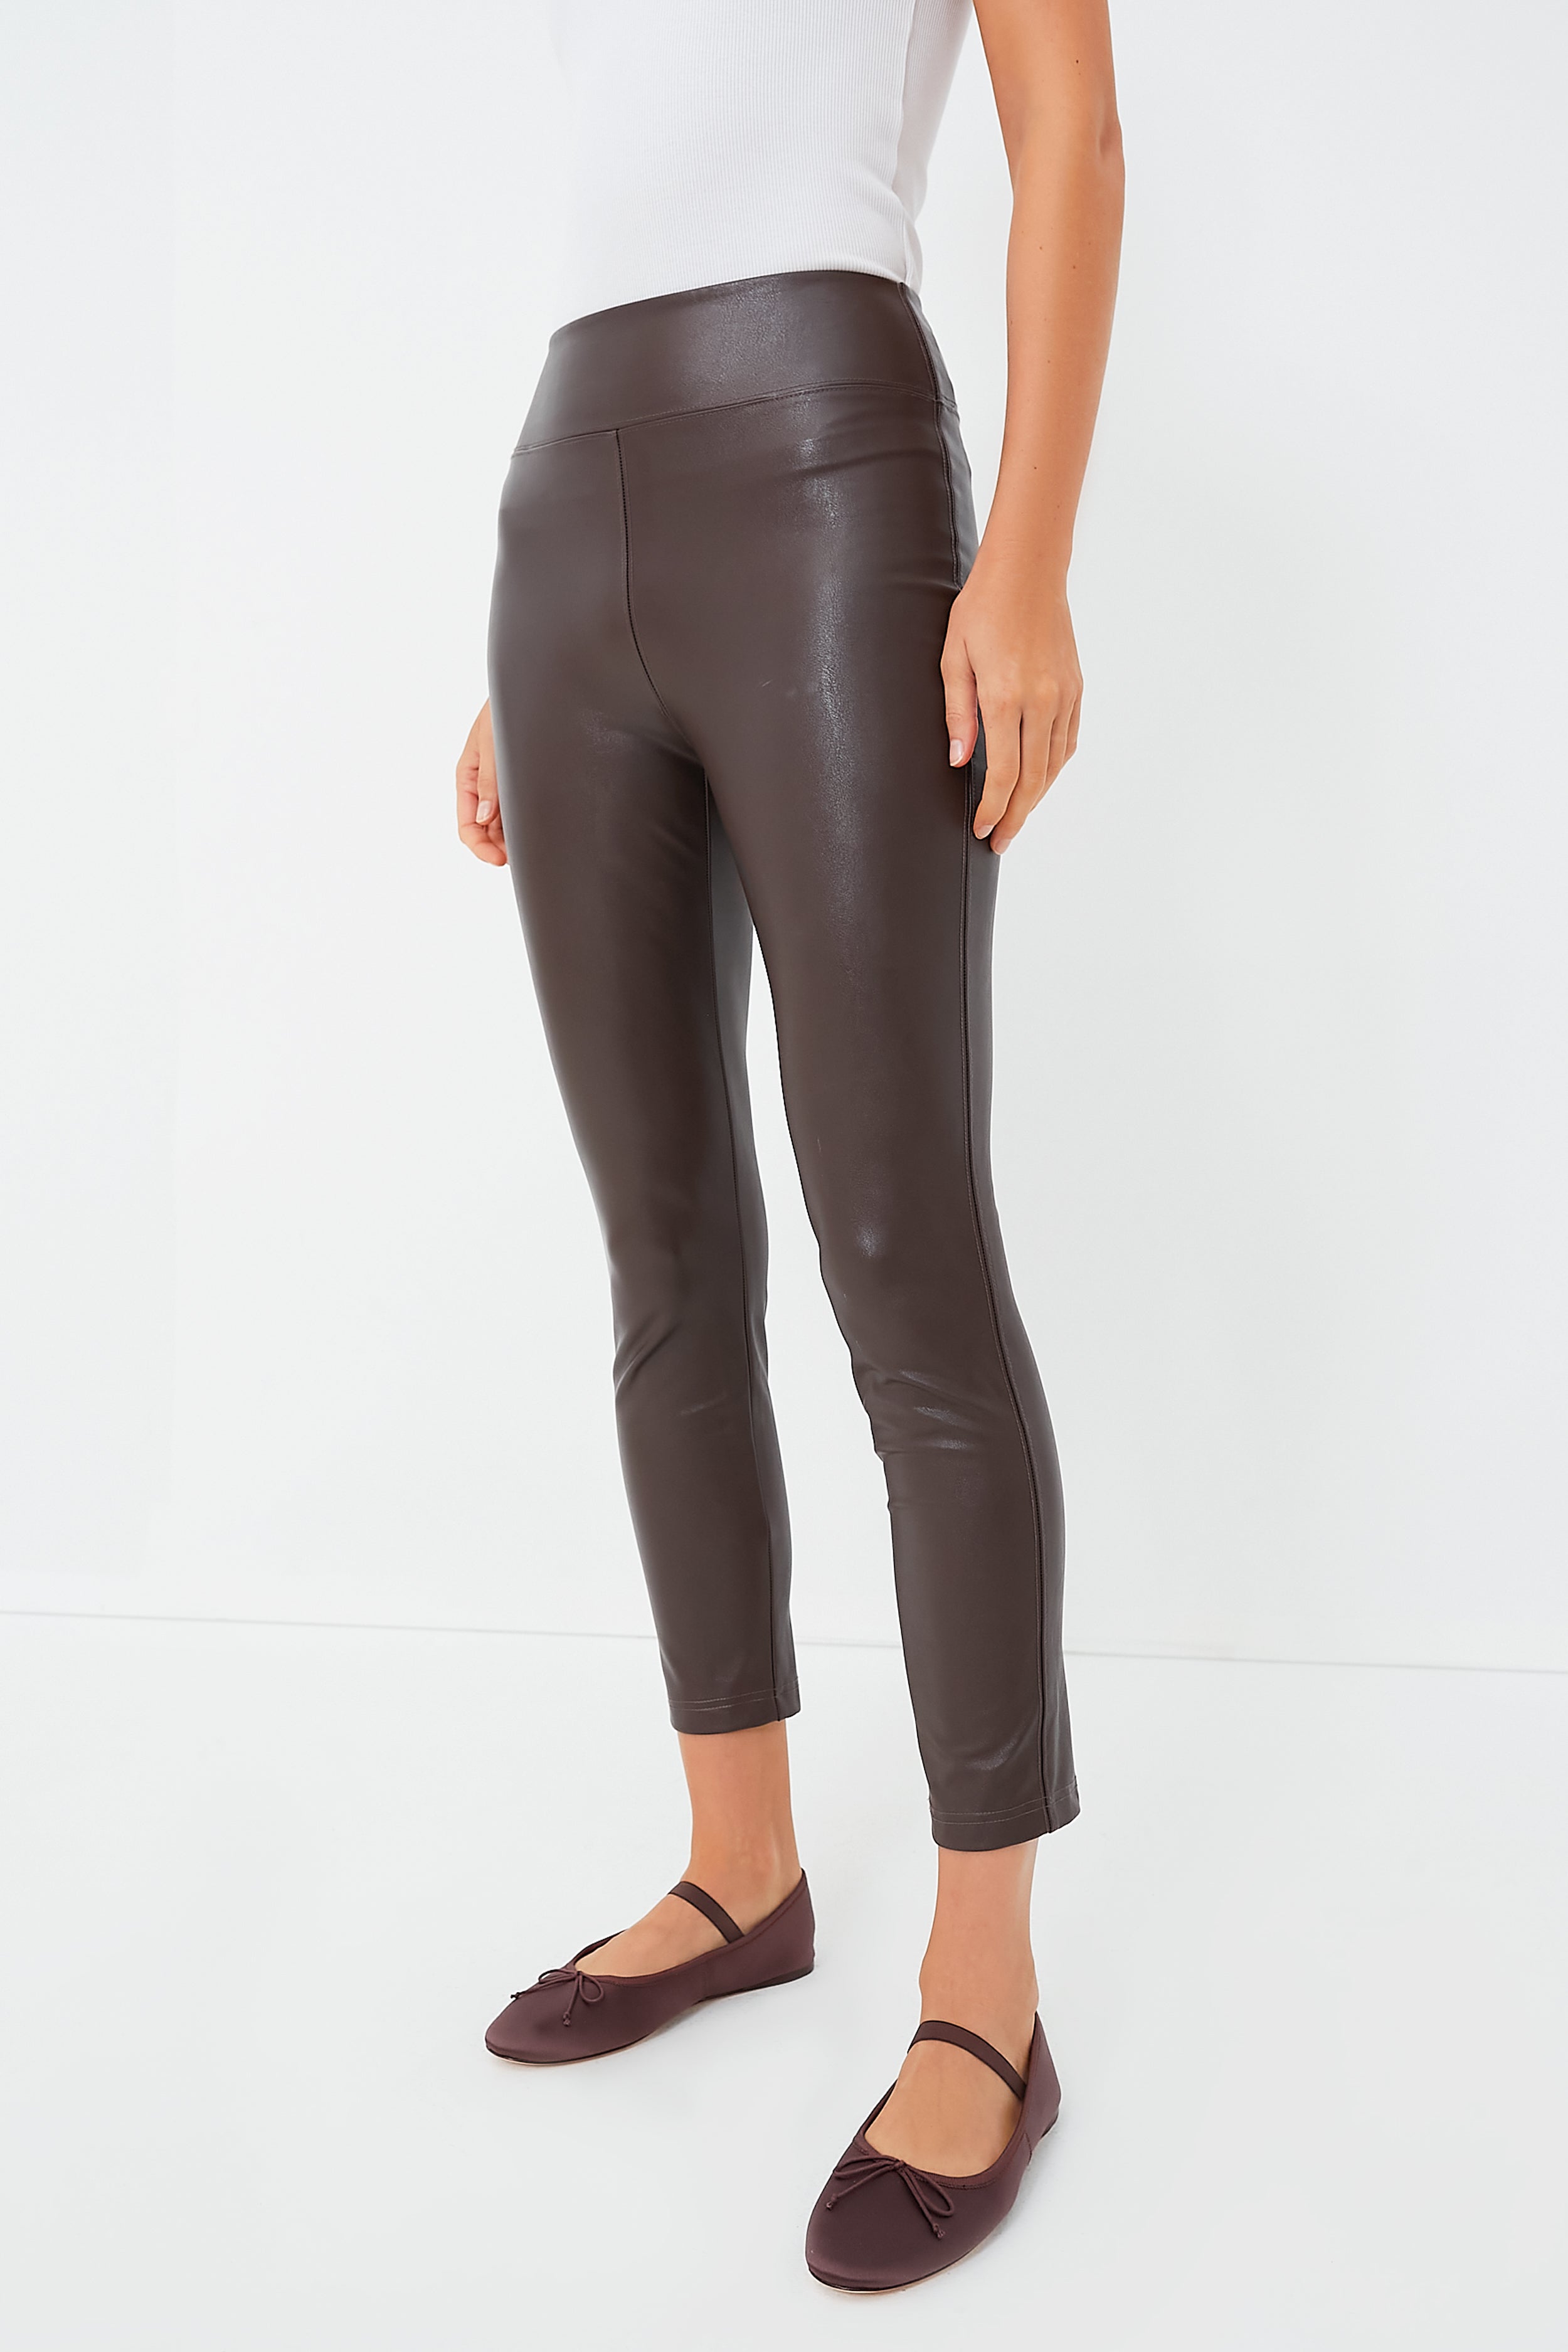 TIME AND TRU Women's Faux Leather Leggings Sz L 12-14 Brown (New) – PayWut